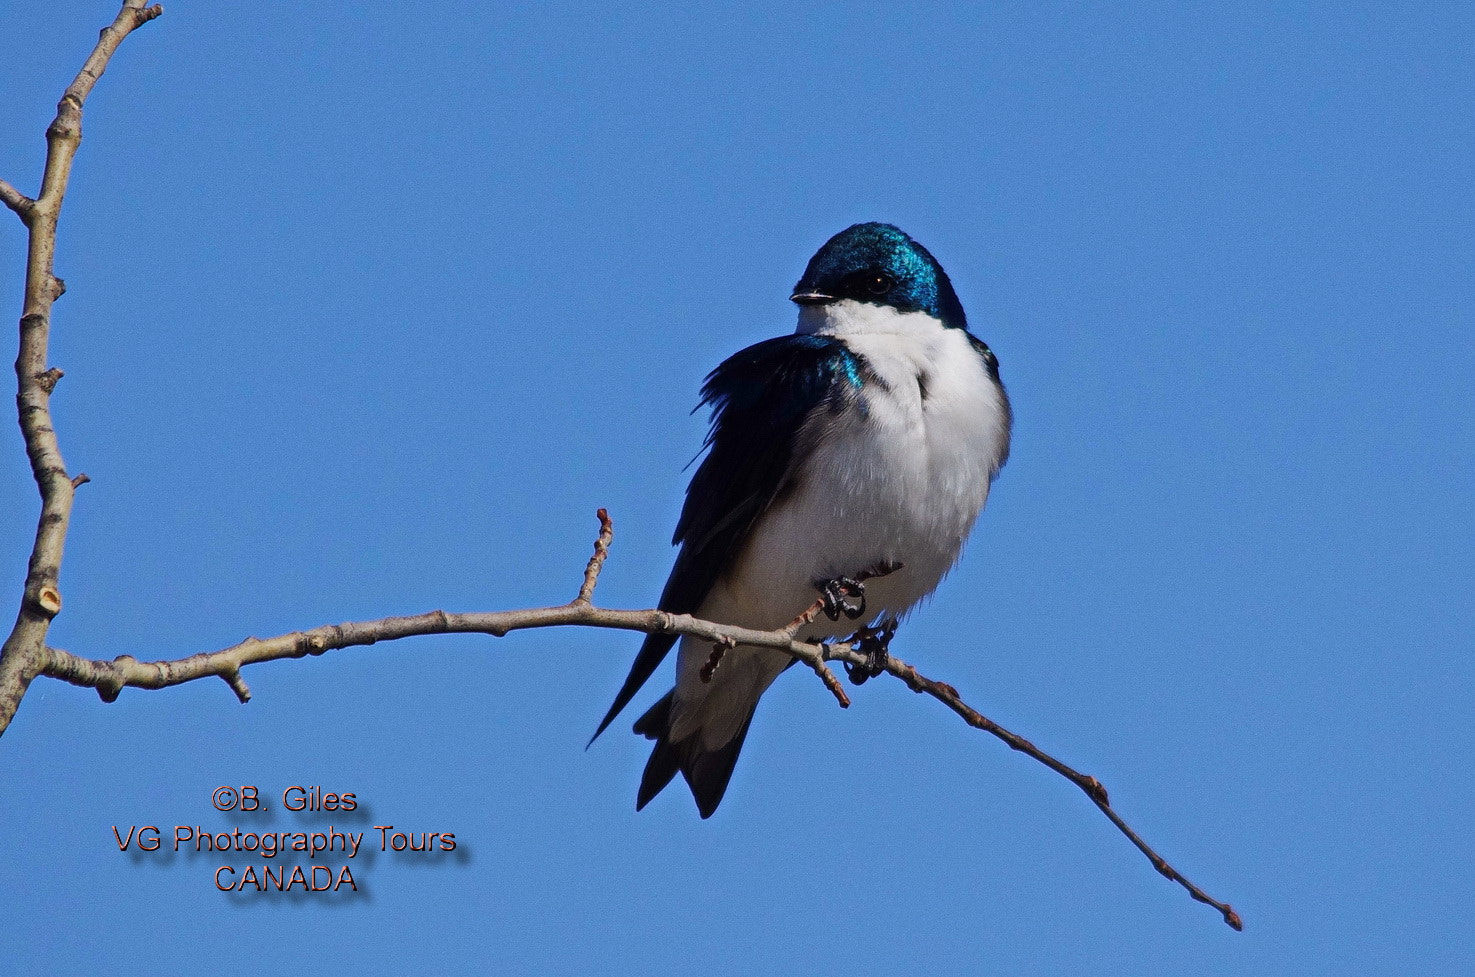 Sigma 150-500mm F5-6.3 DG OS HSM sample photo. Tree swallow photography